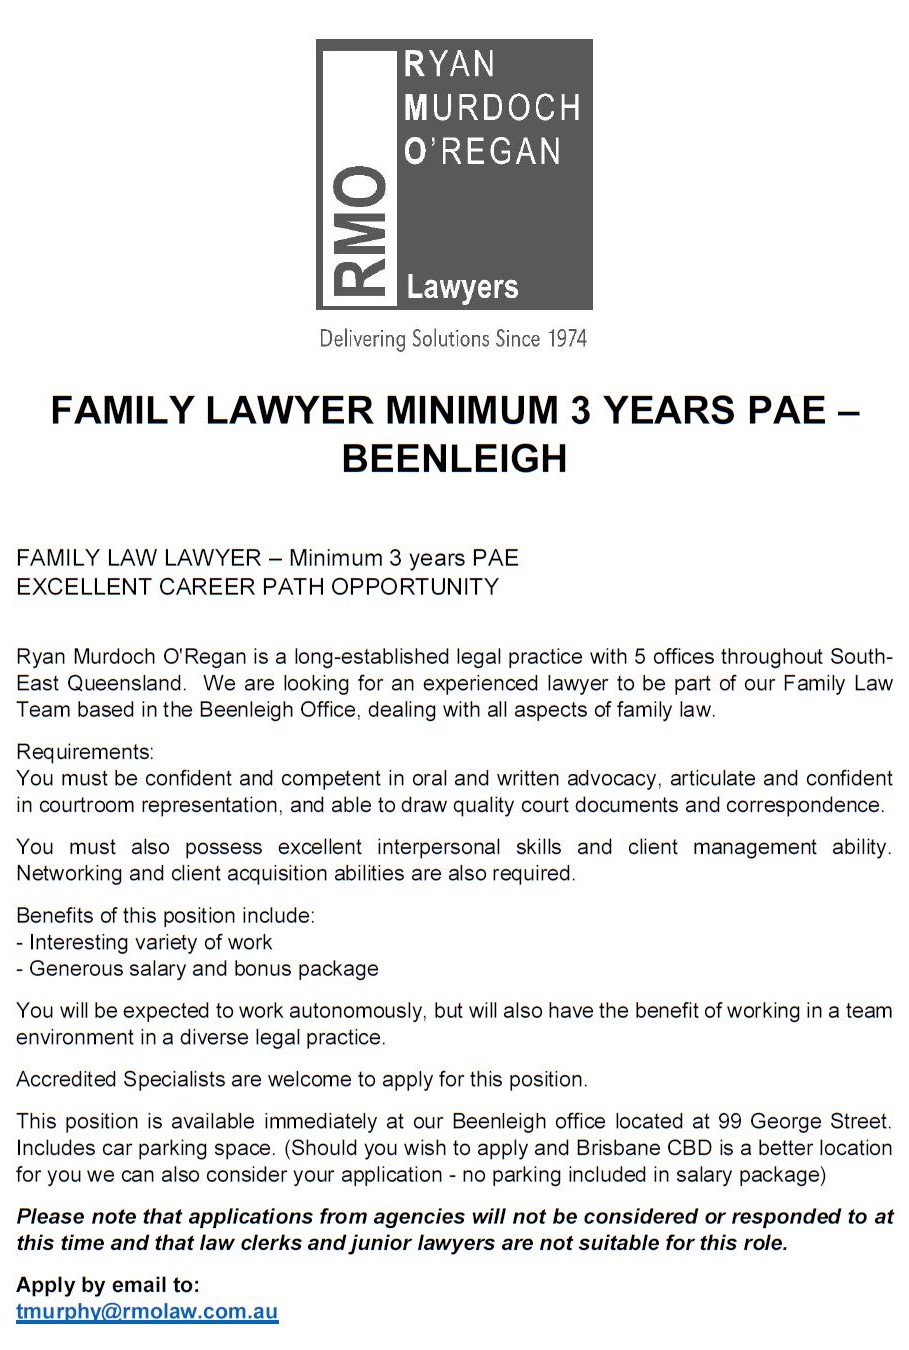 Family-Lawyer-Minimum-3-Years-PAE-Beenleigh